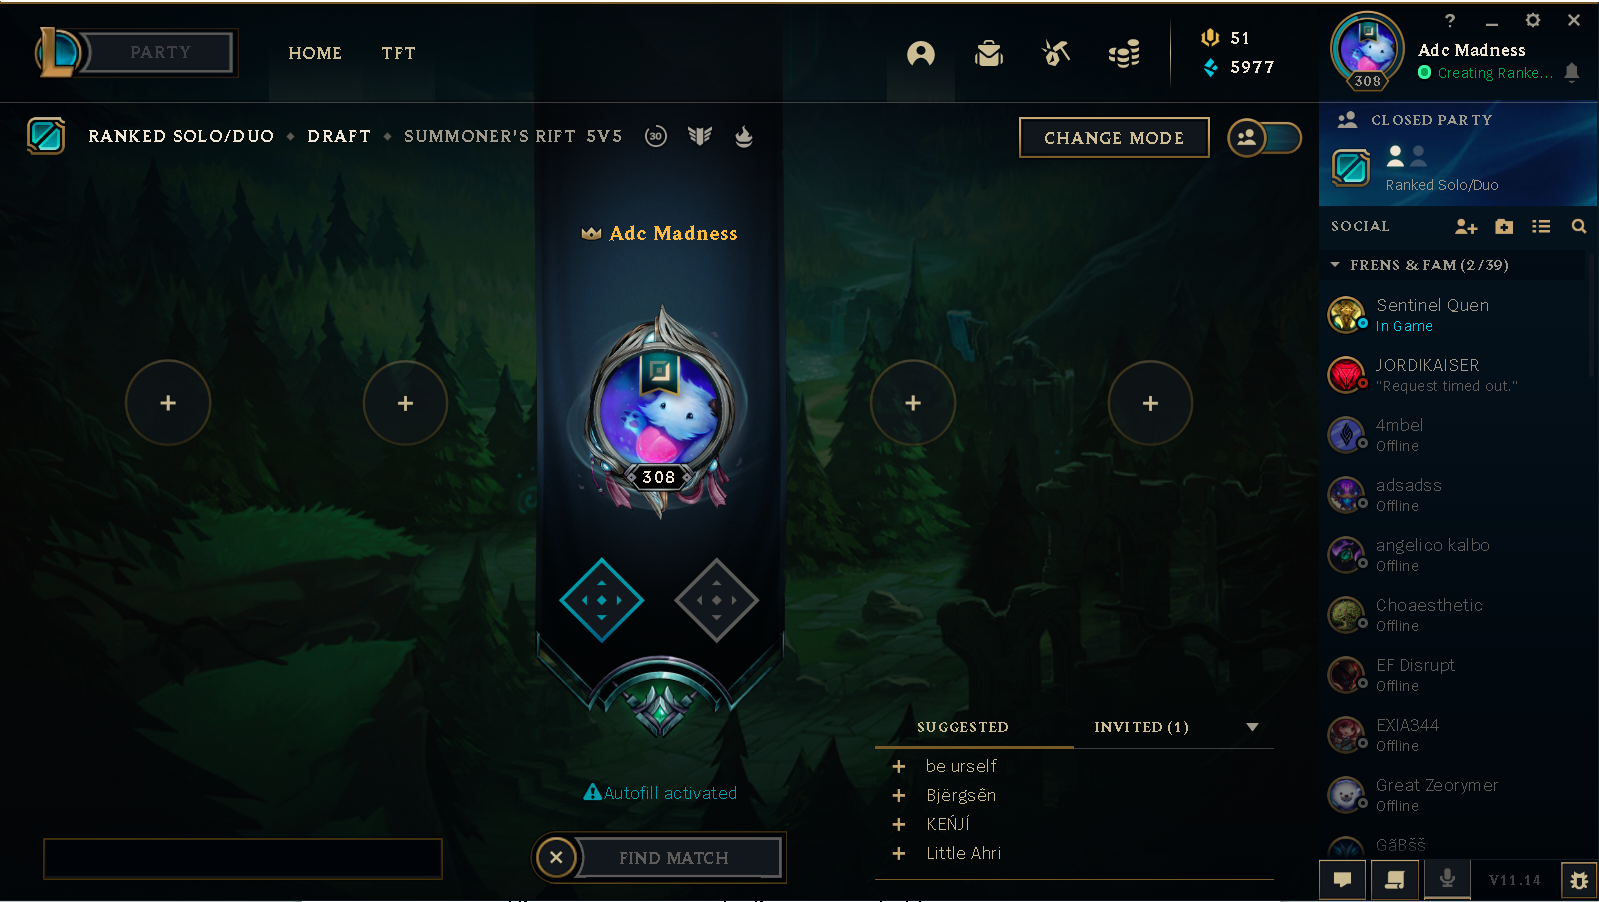 An In-depth Drafting Guide for Ranked Games - League of Legends